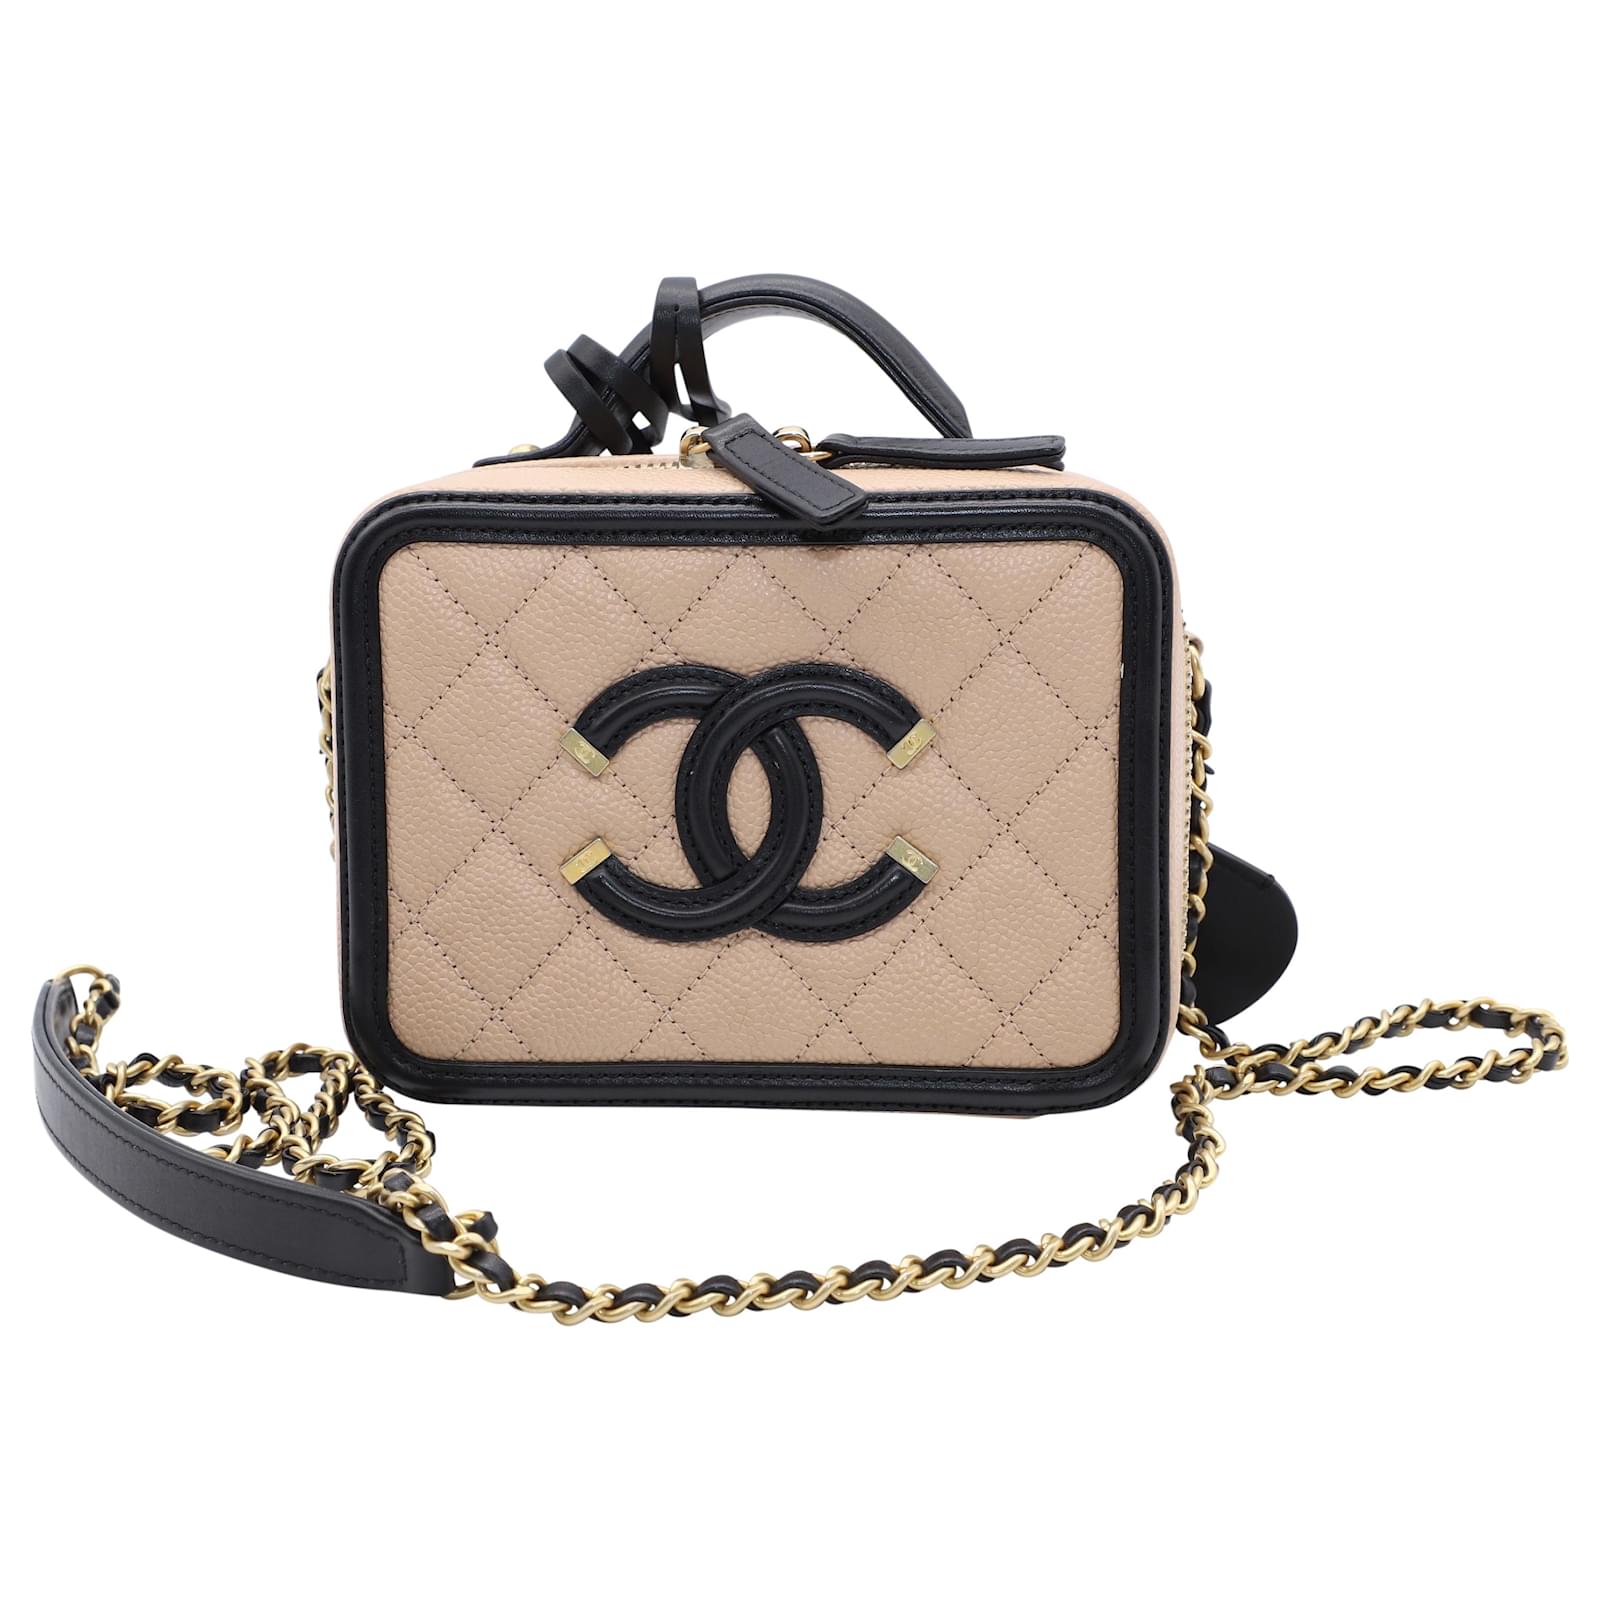 Chanel Small CC Filigree Vanity Case in Beige Leather